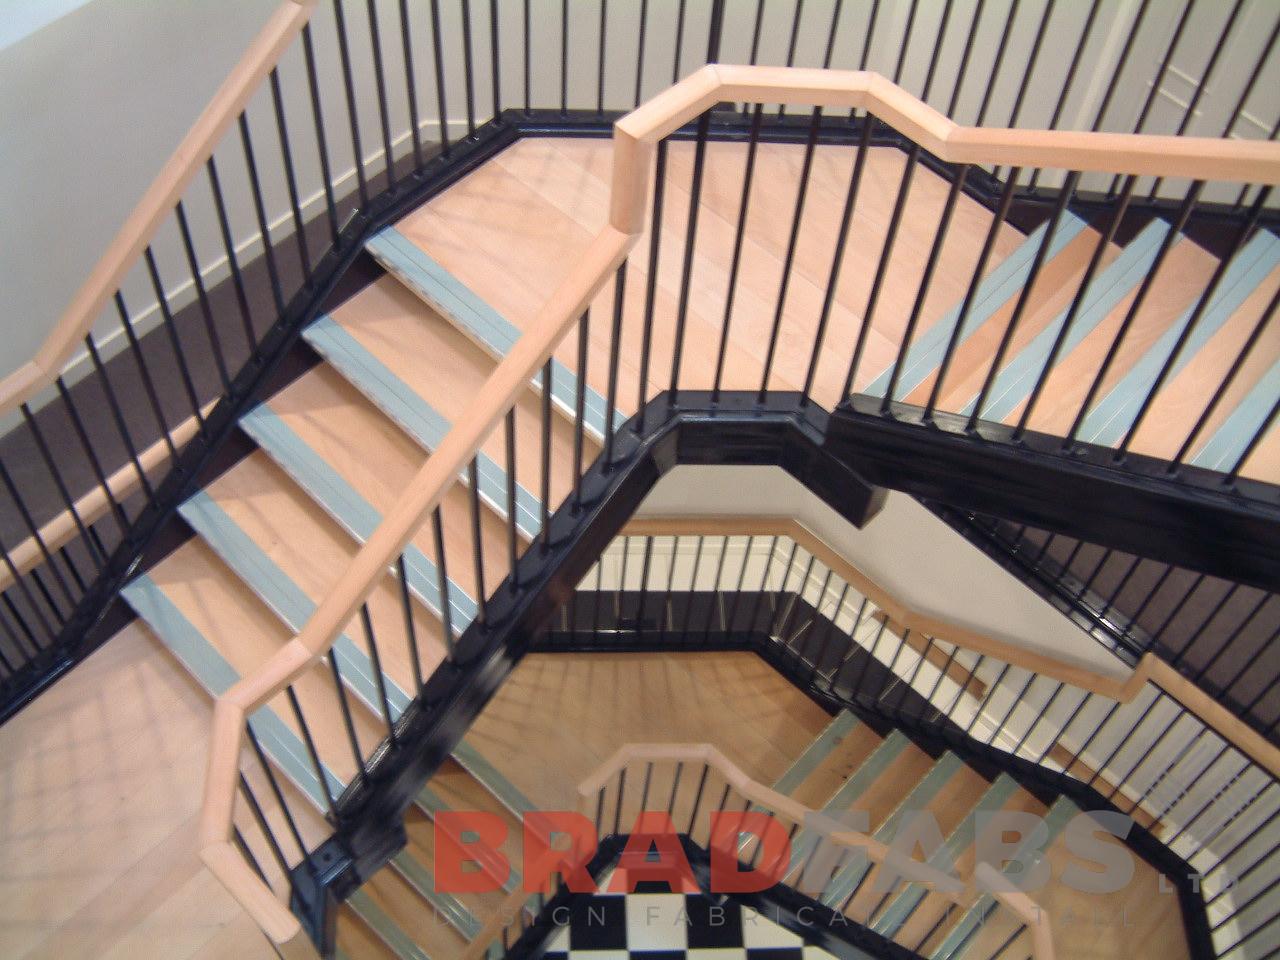 Bradfabs is one of the only few companies that possess the skills to make a curved steel staircase